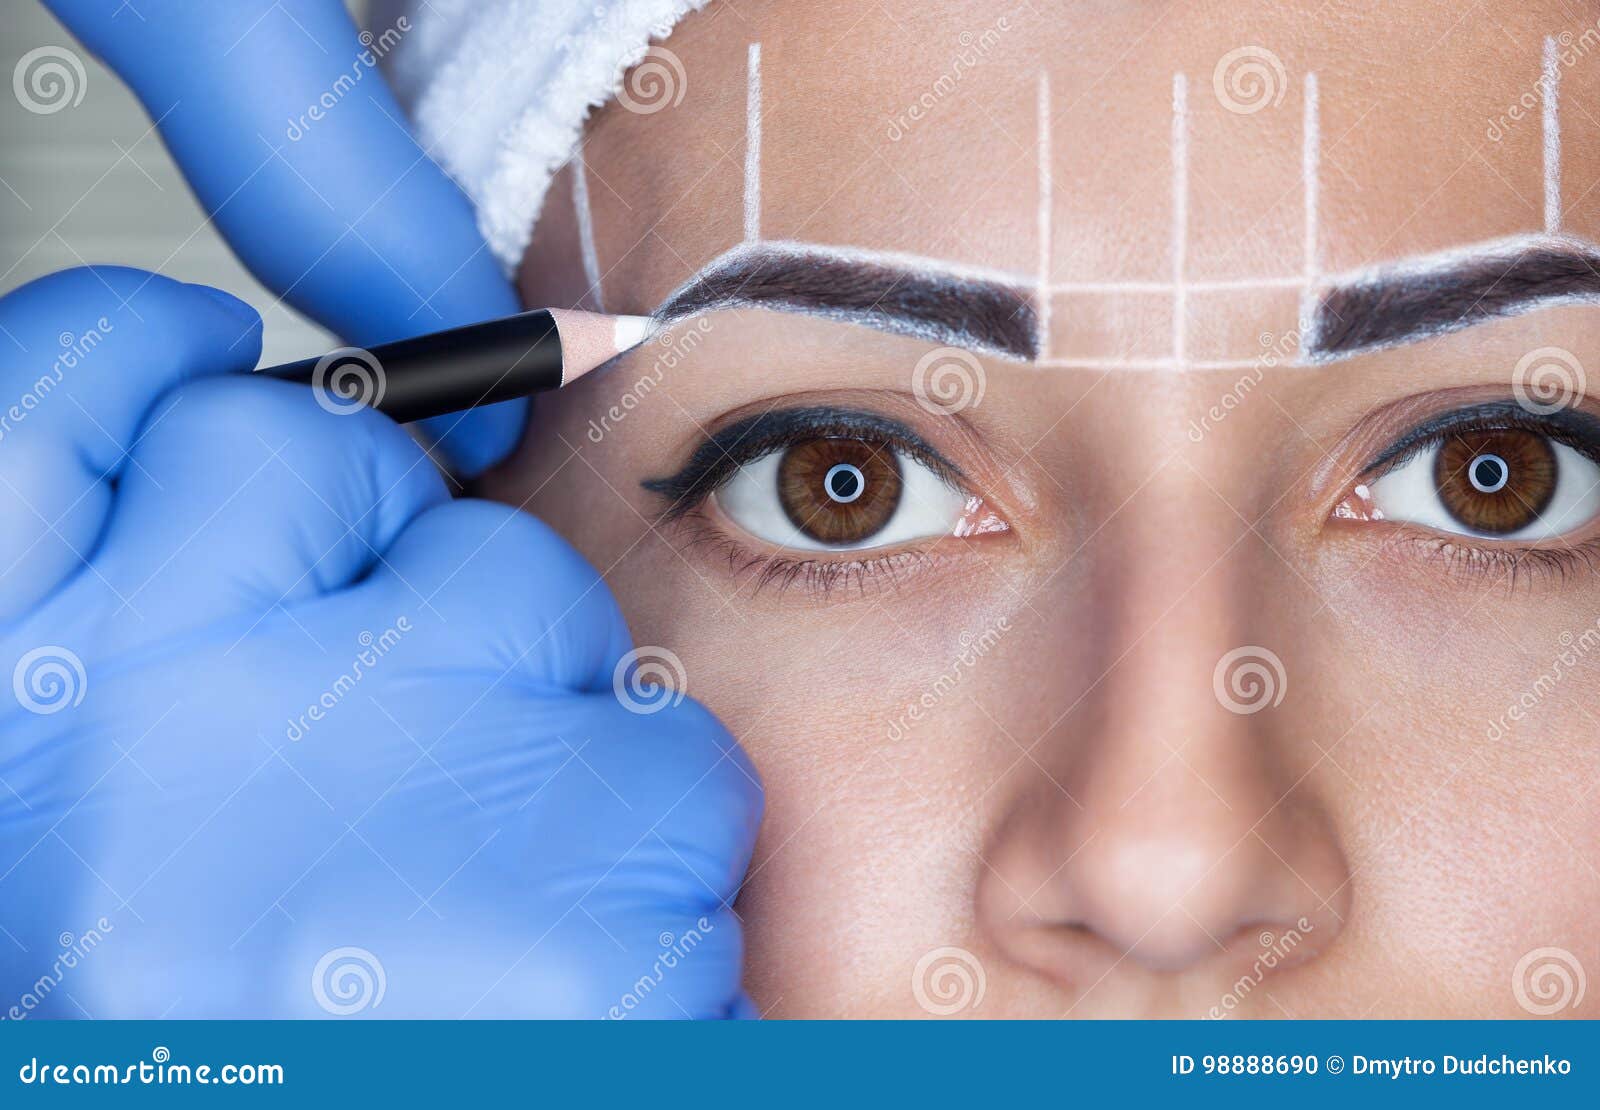 permanent make-up for eyebrows of beautiful woman with thick brows in beauty salon.